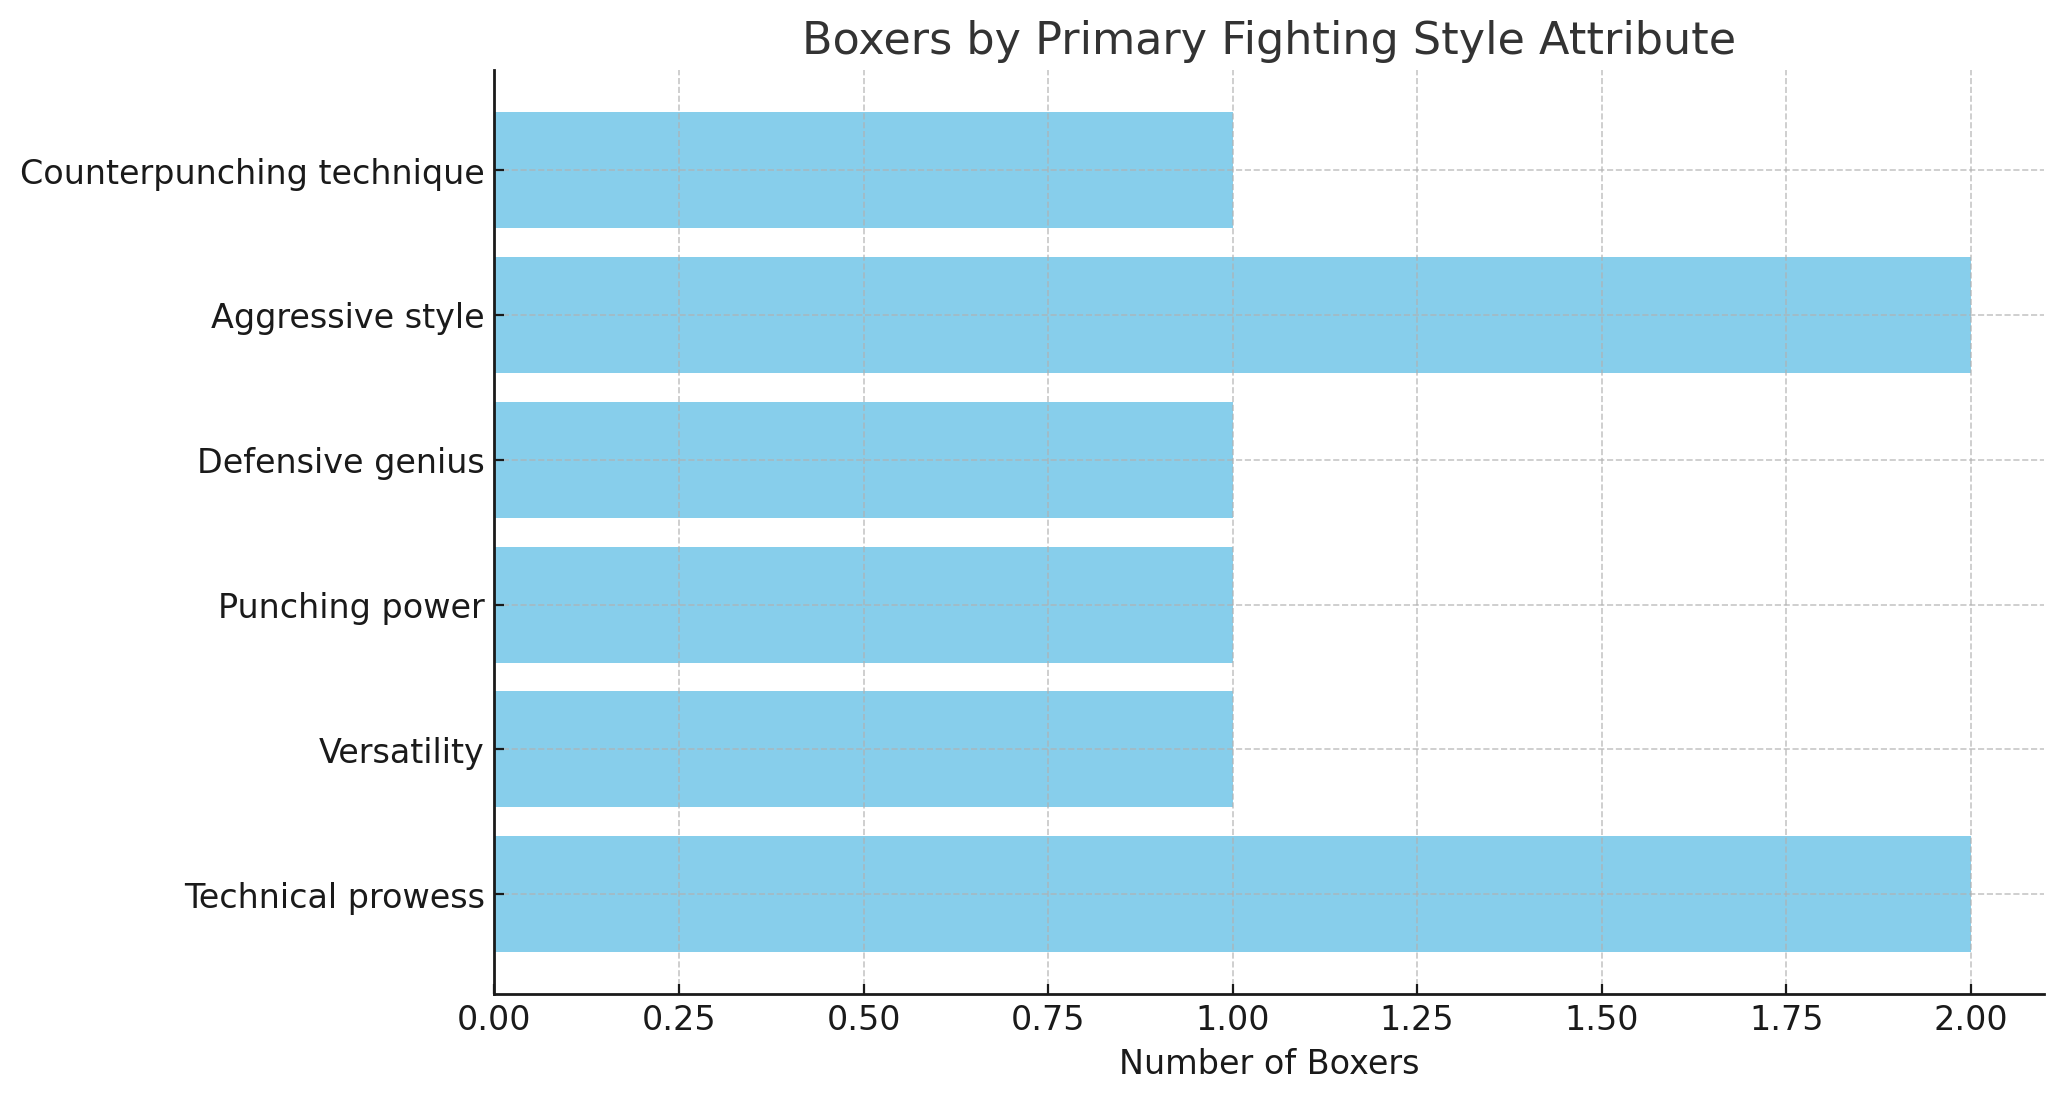 Evolution of Boxing Styles